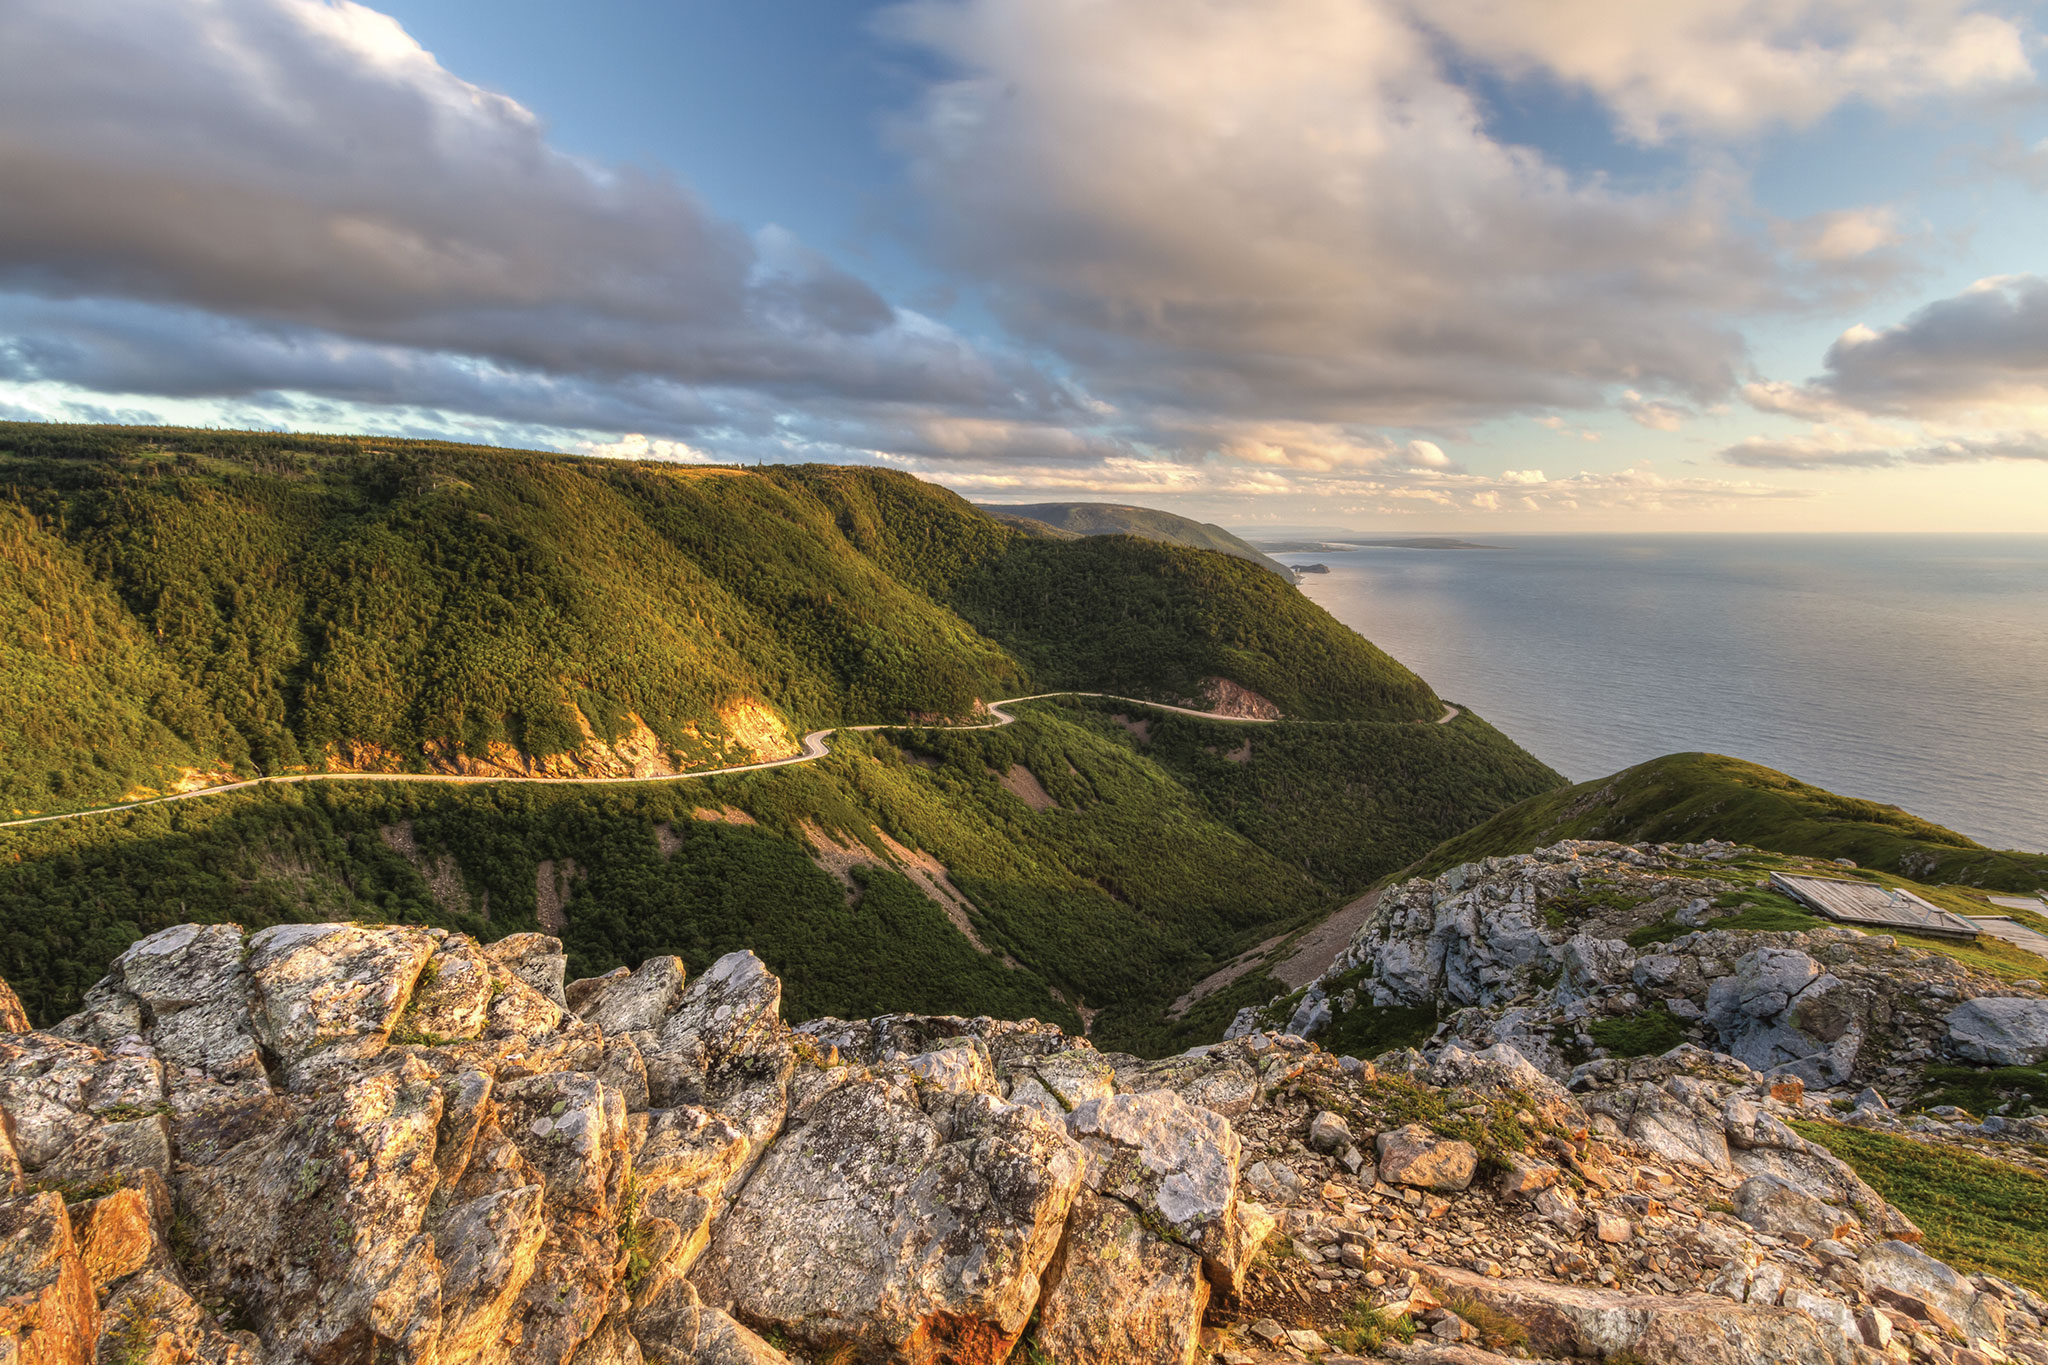 A winding trail cuts through the green cliffs of Cape Breton Highlands National Park, with an incredible view of the rocky shoreline shadowed by puffy clouds and endless miles of ocean.